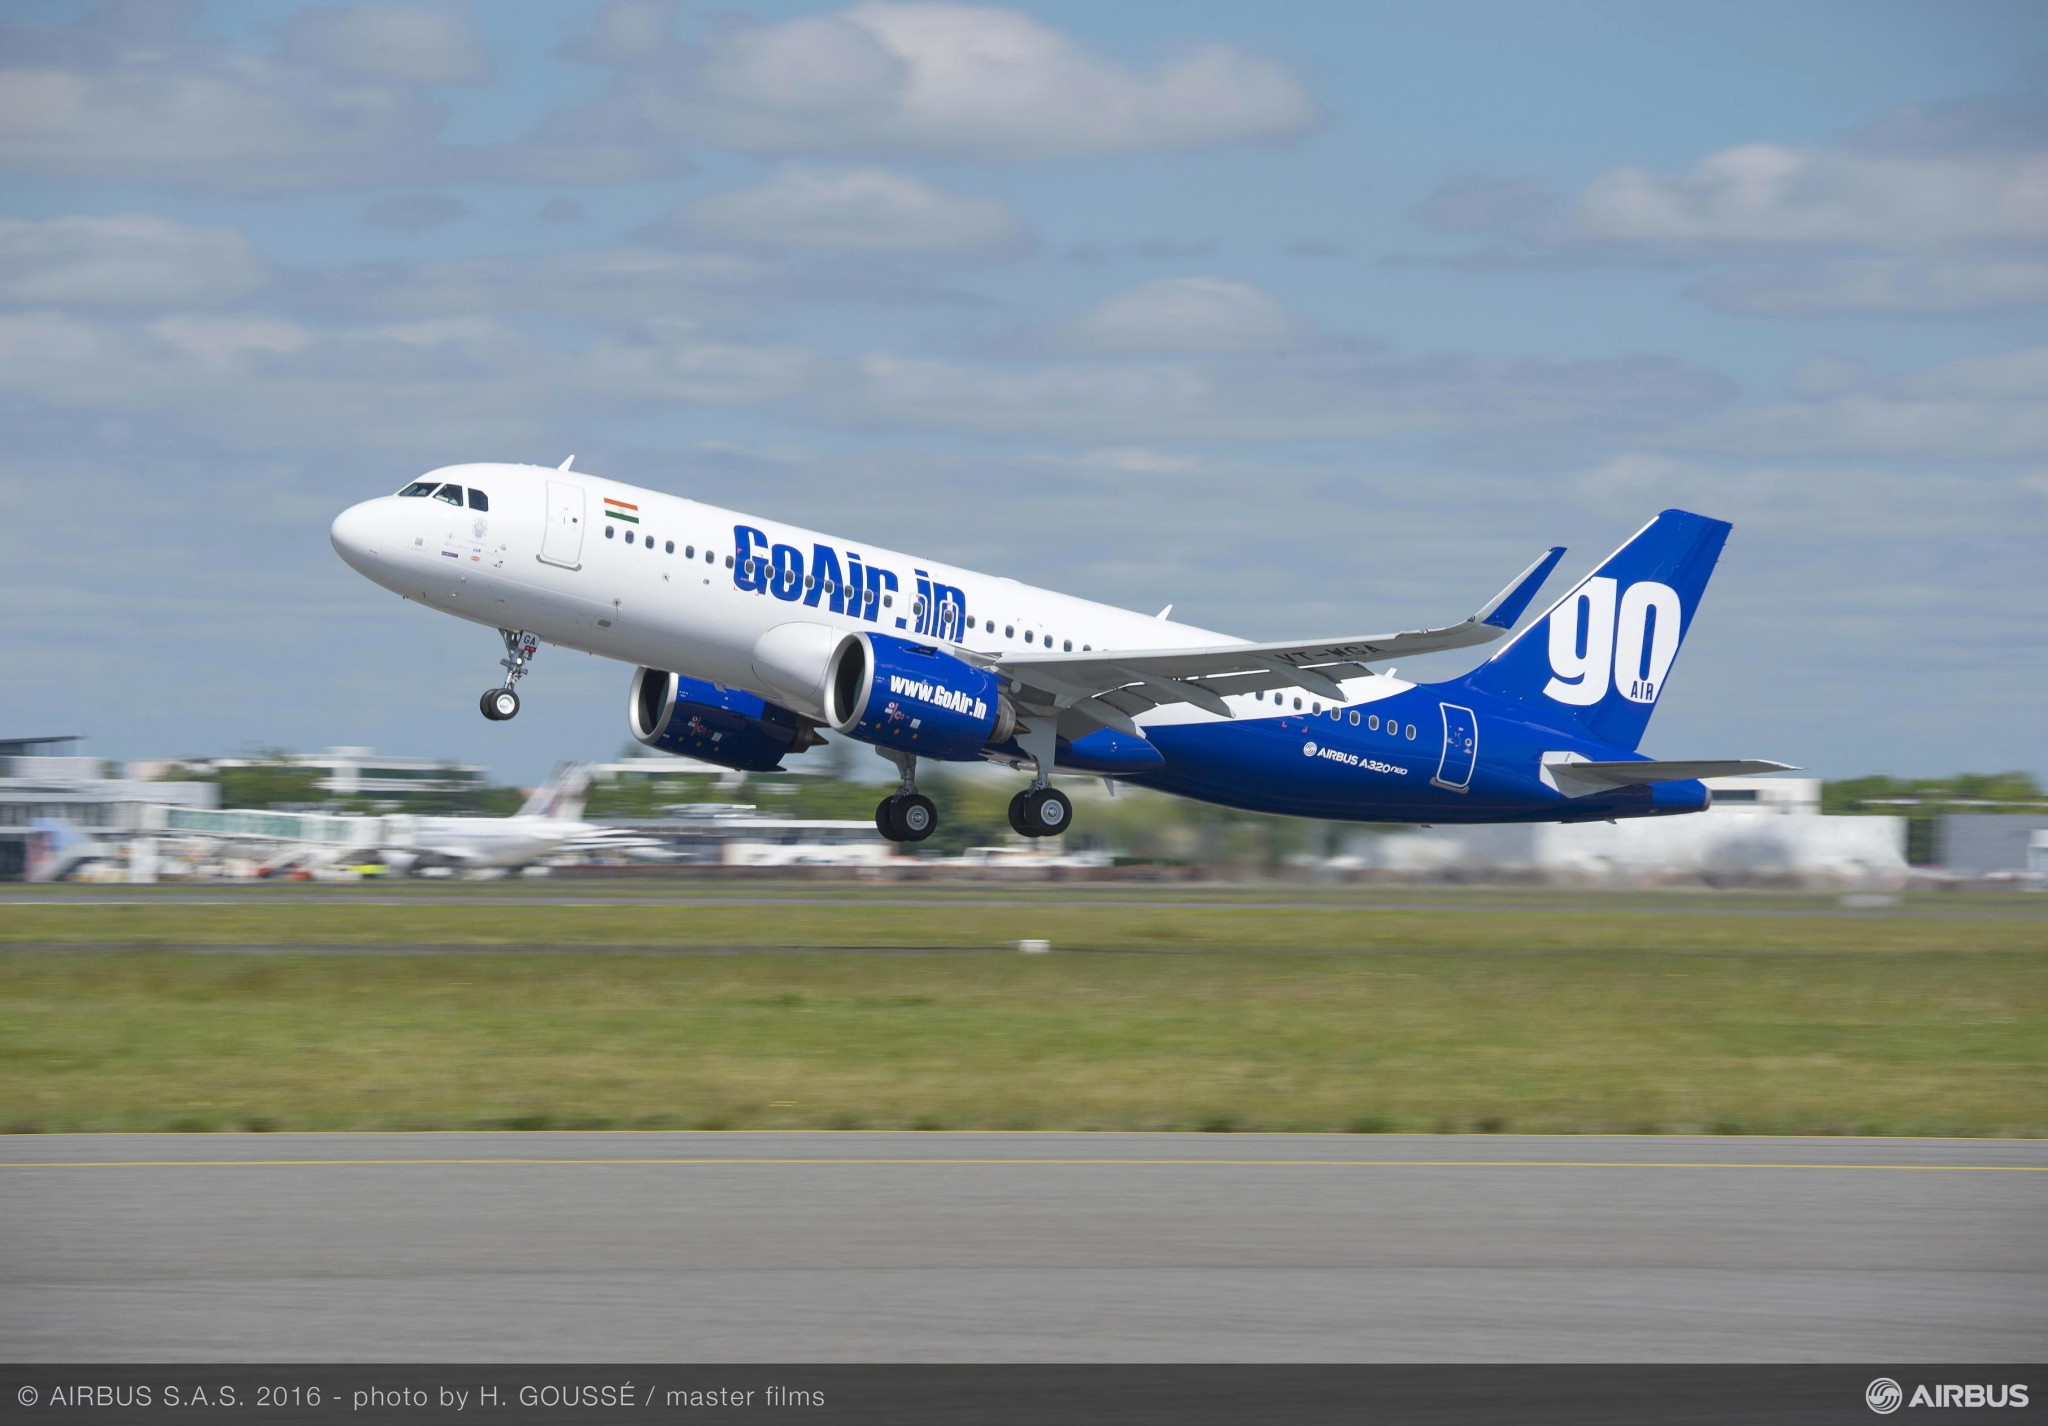 Iran Air takes delivery of its first Airbus aircraft; GoAir firms order for 72 A320neos